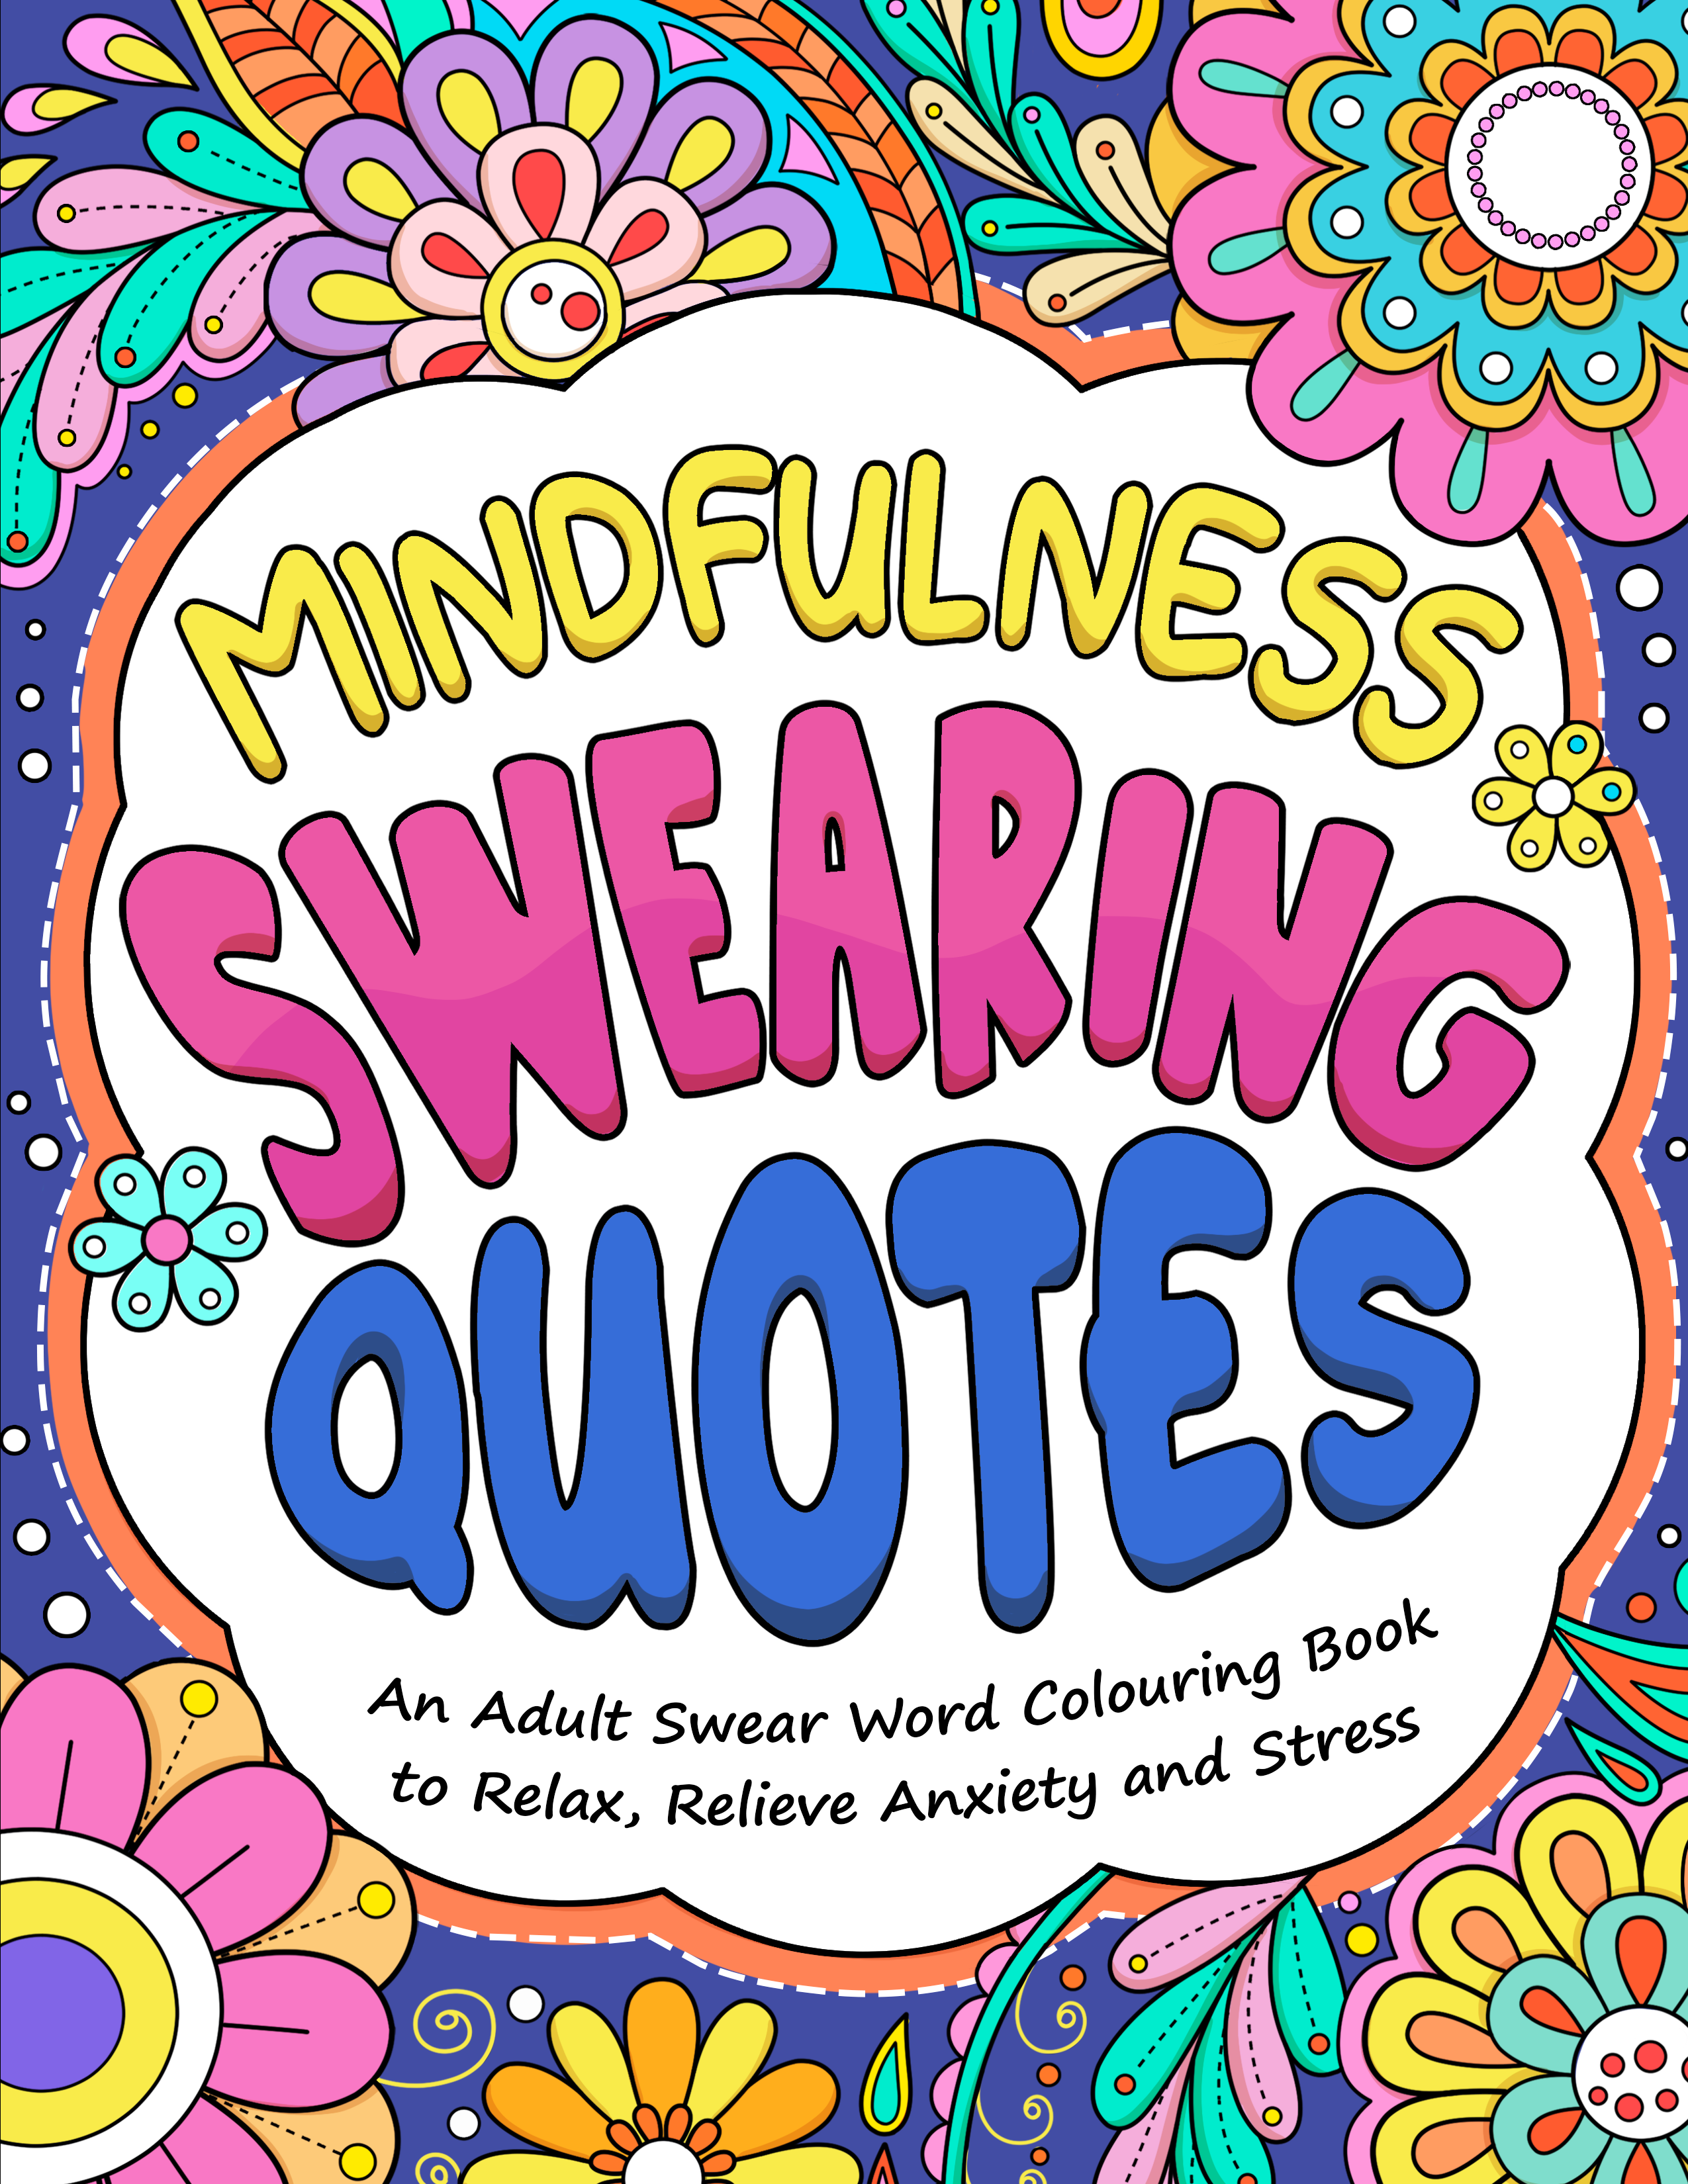 Mindfulness Swearing Quotes Colouring Book